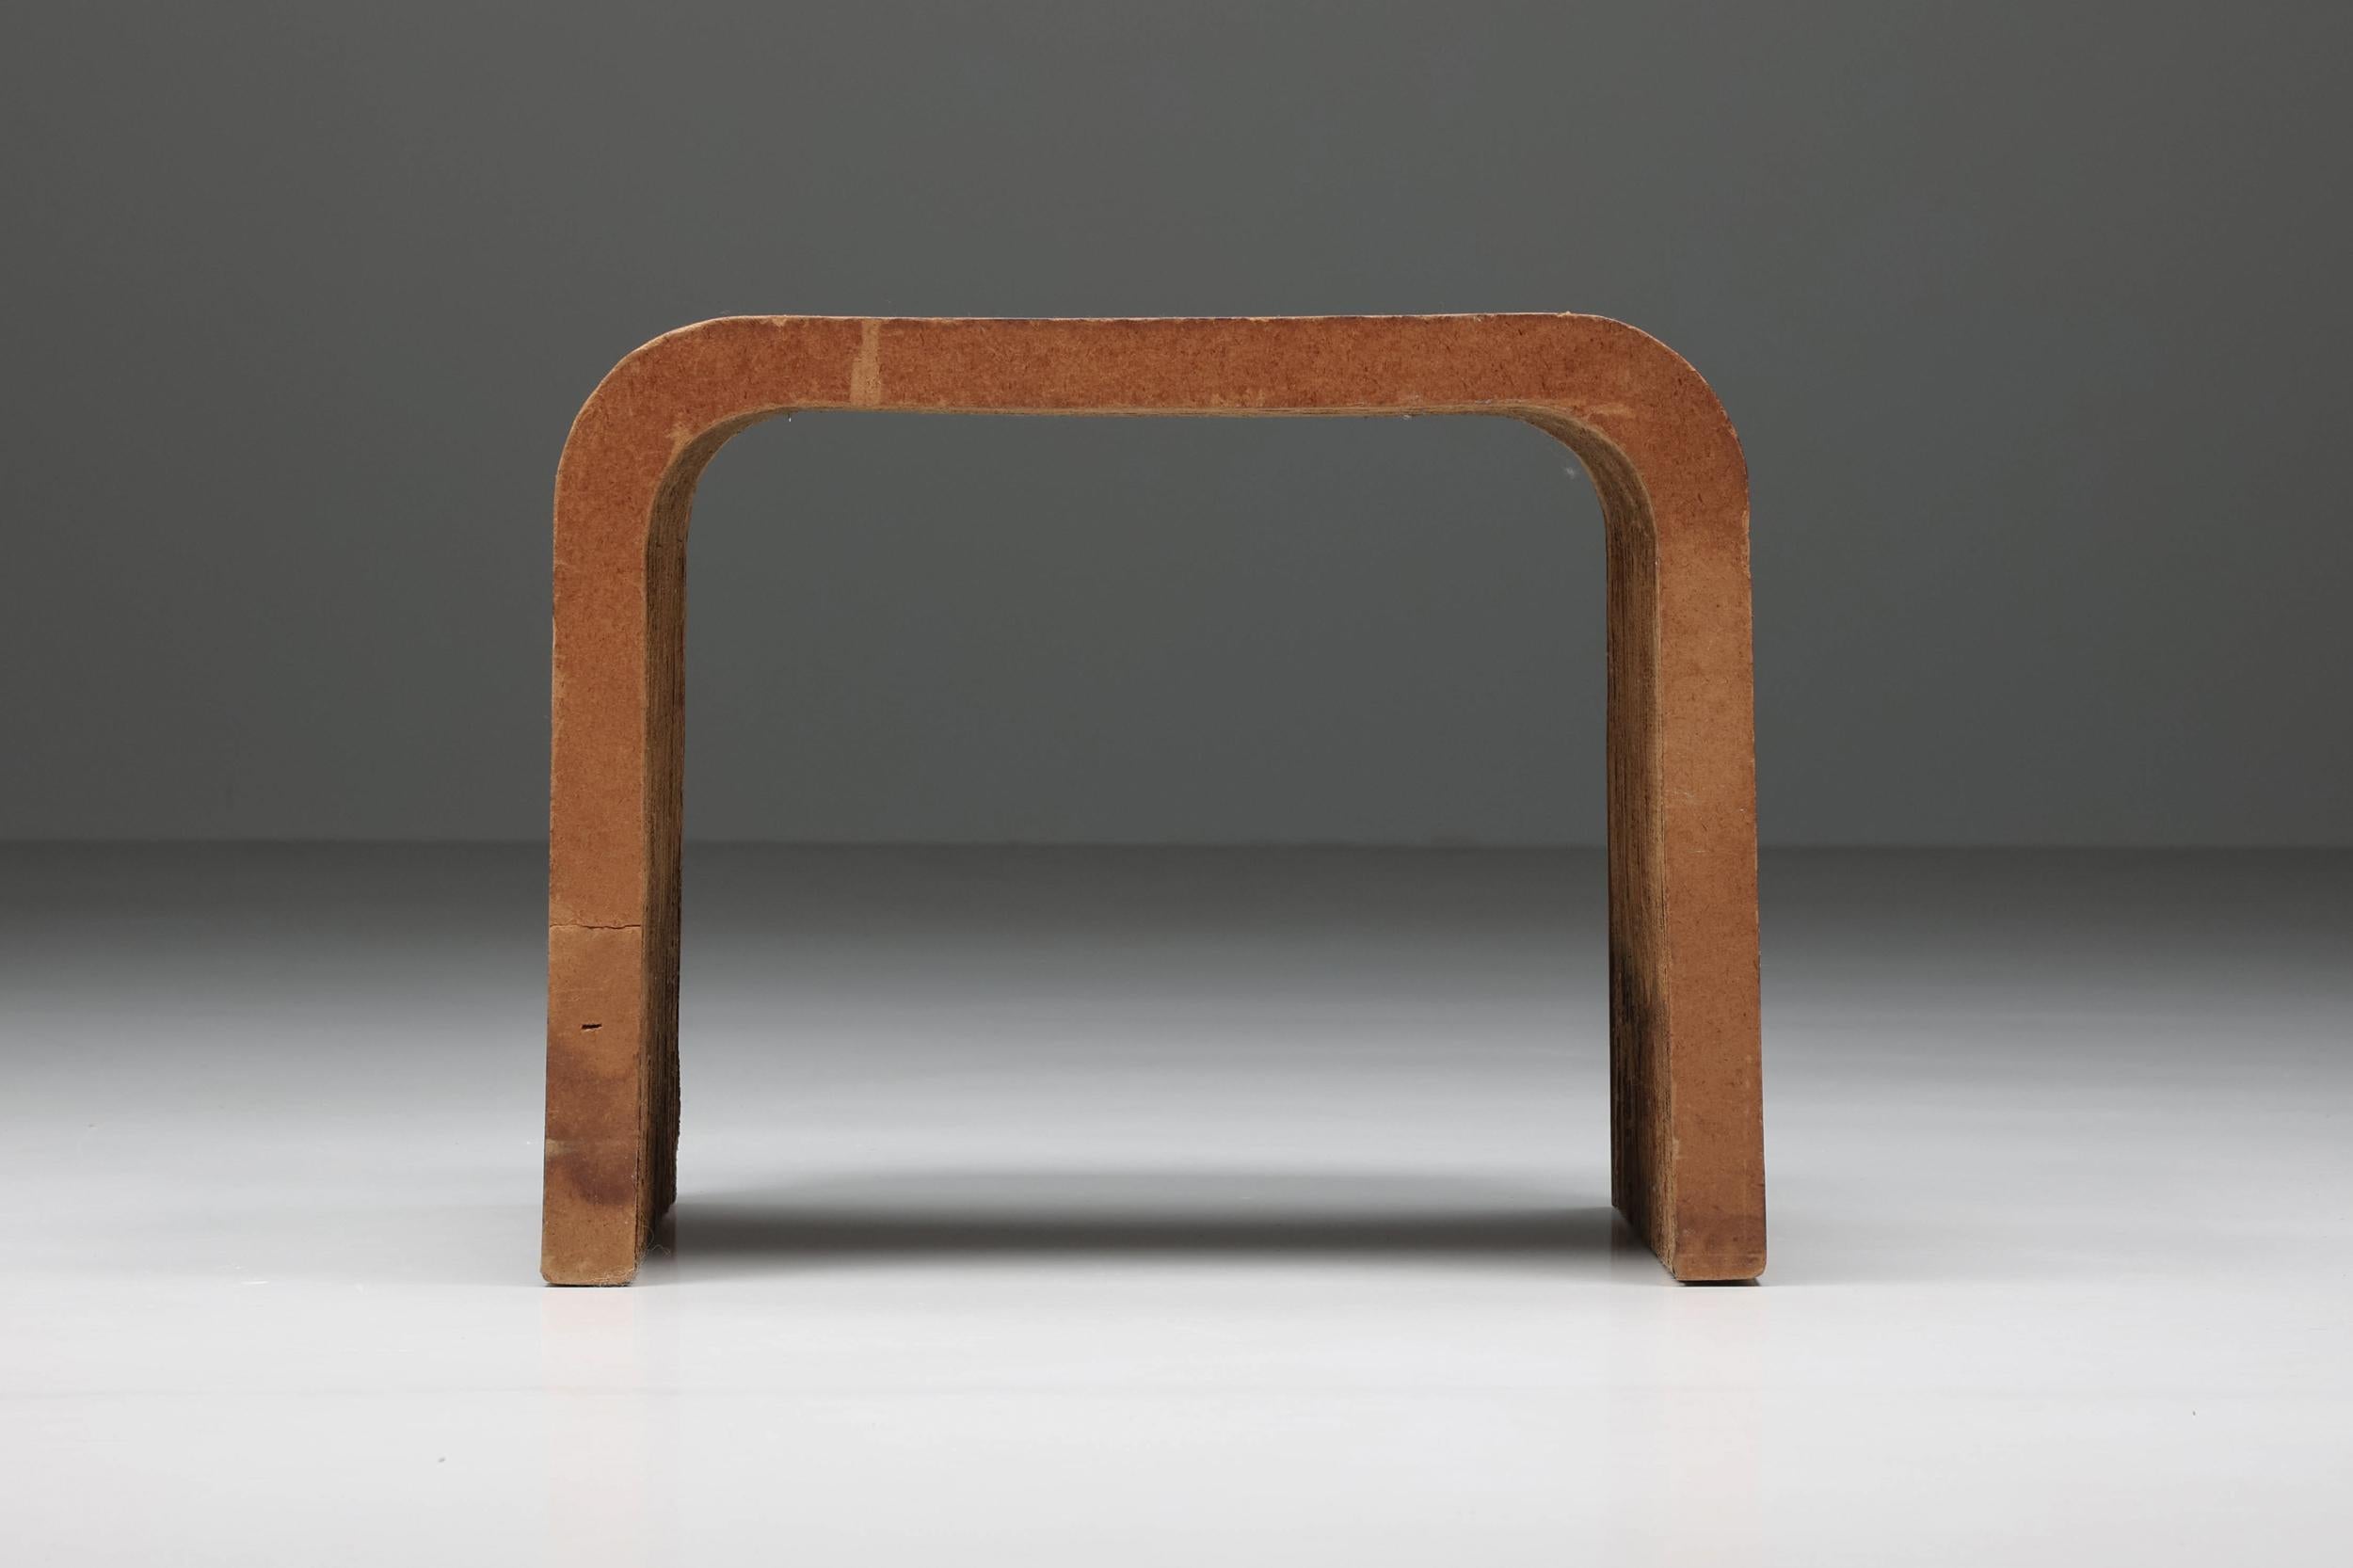 Frank Gehry; Vitra; Deconstructivism; Architect furniture; Cardboard stool; 

Frank Gehry cardboard stool for Vitra. The architect Frank Gehry is known for his use of unusual materials. With his 1972 furniture series 'Easy Edges', he succeeded in